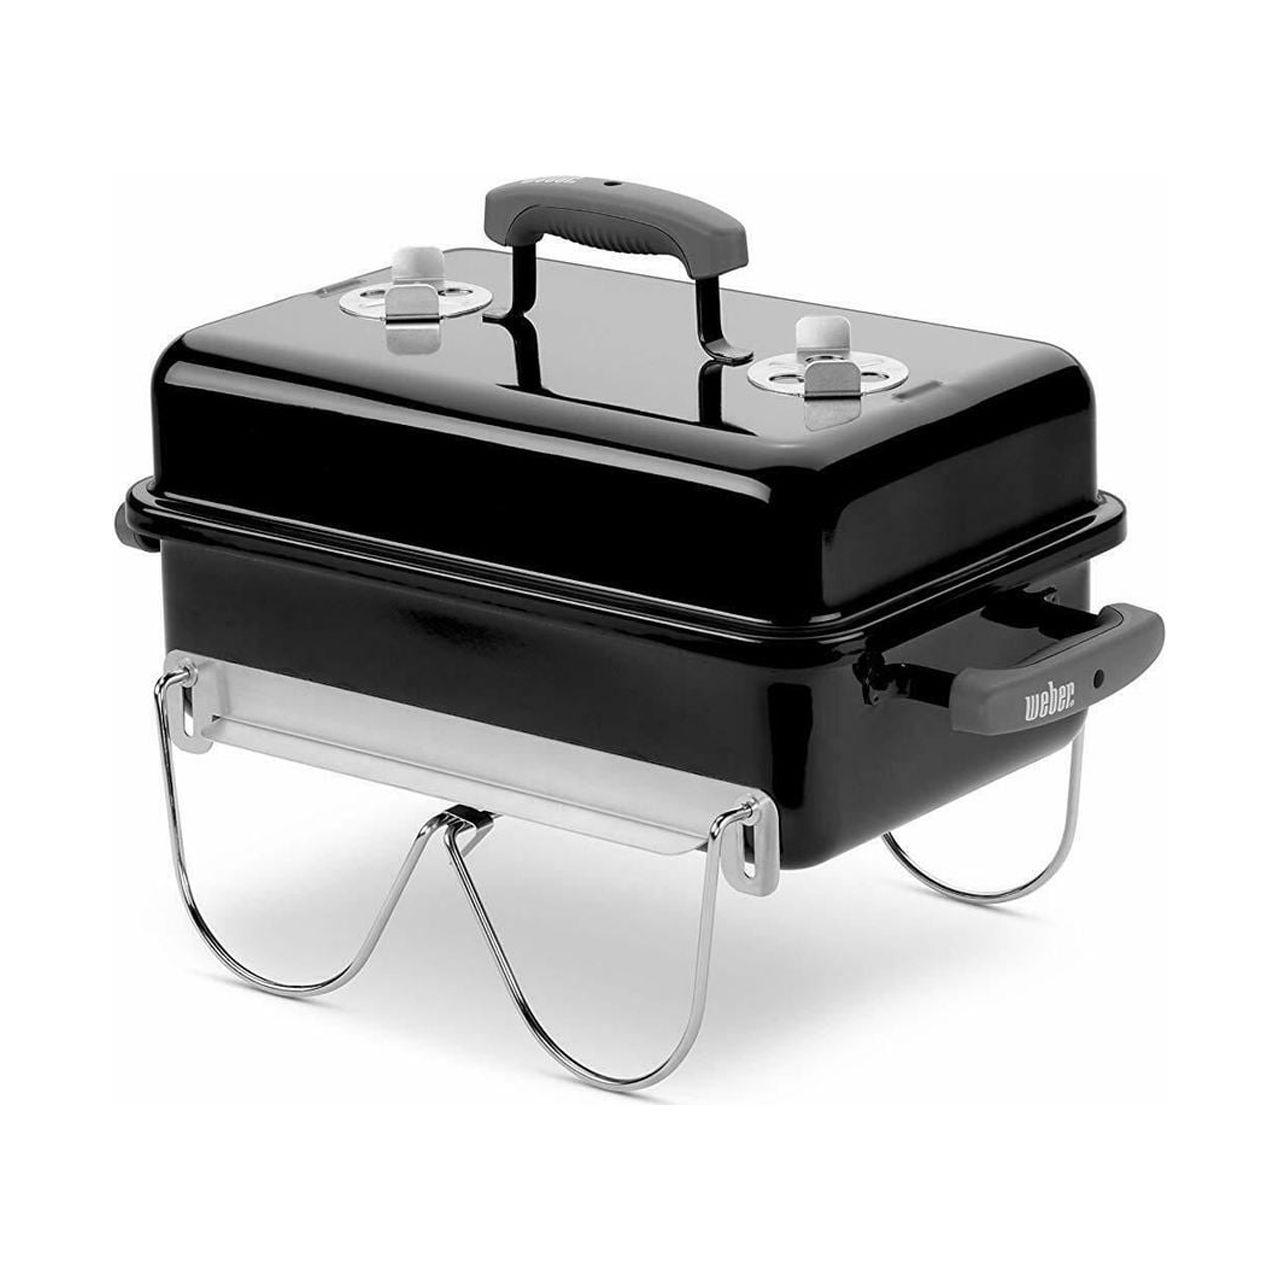 weber go-anywhere charcoal grill - image 2 of 4